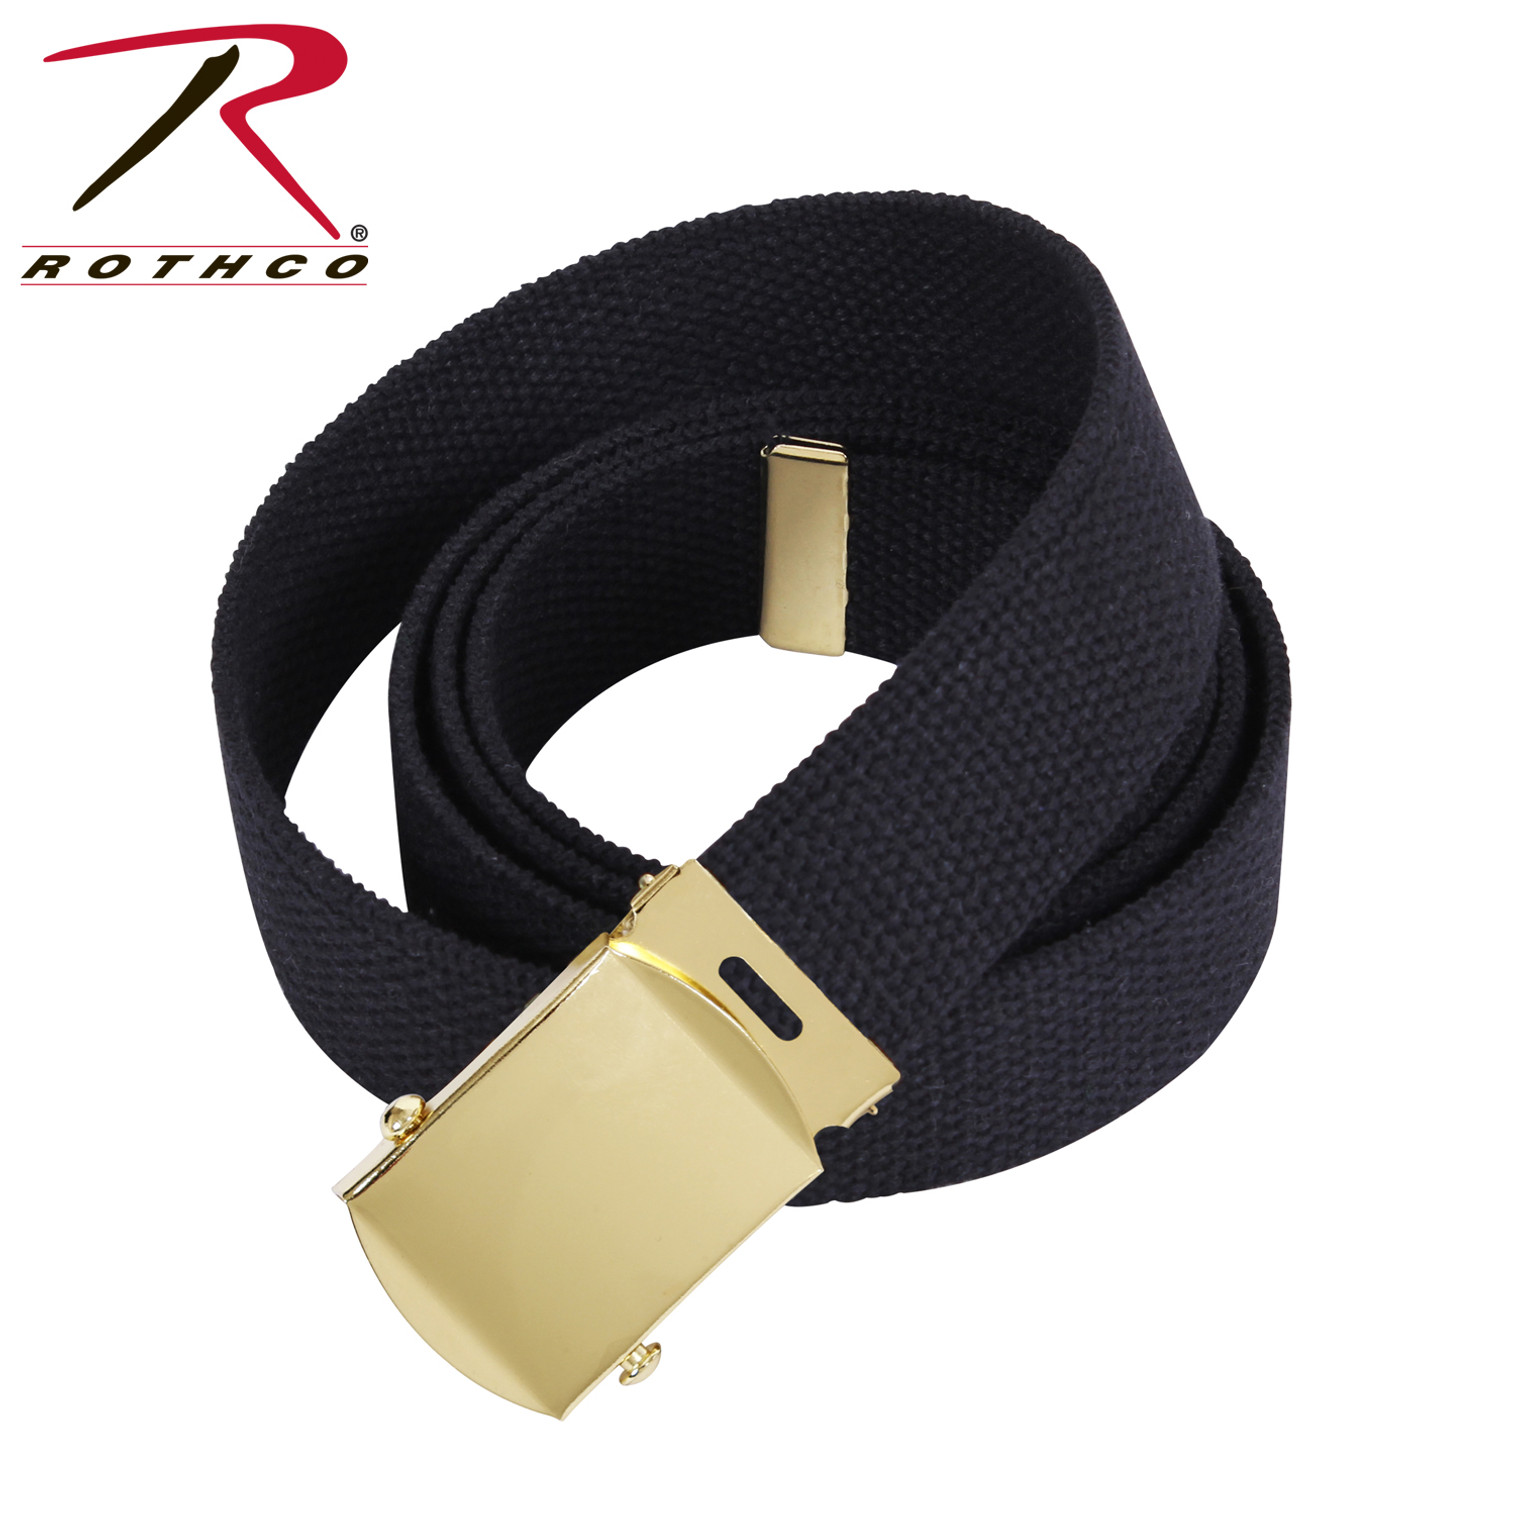 Rothco Military Web Belts - 54 Inches Long - Black/Gold Buckle